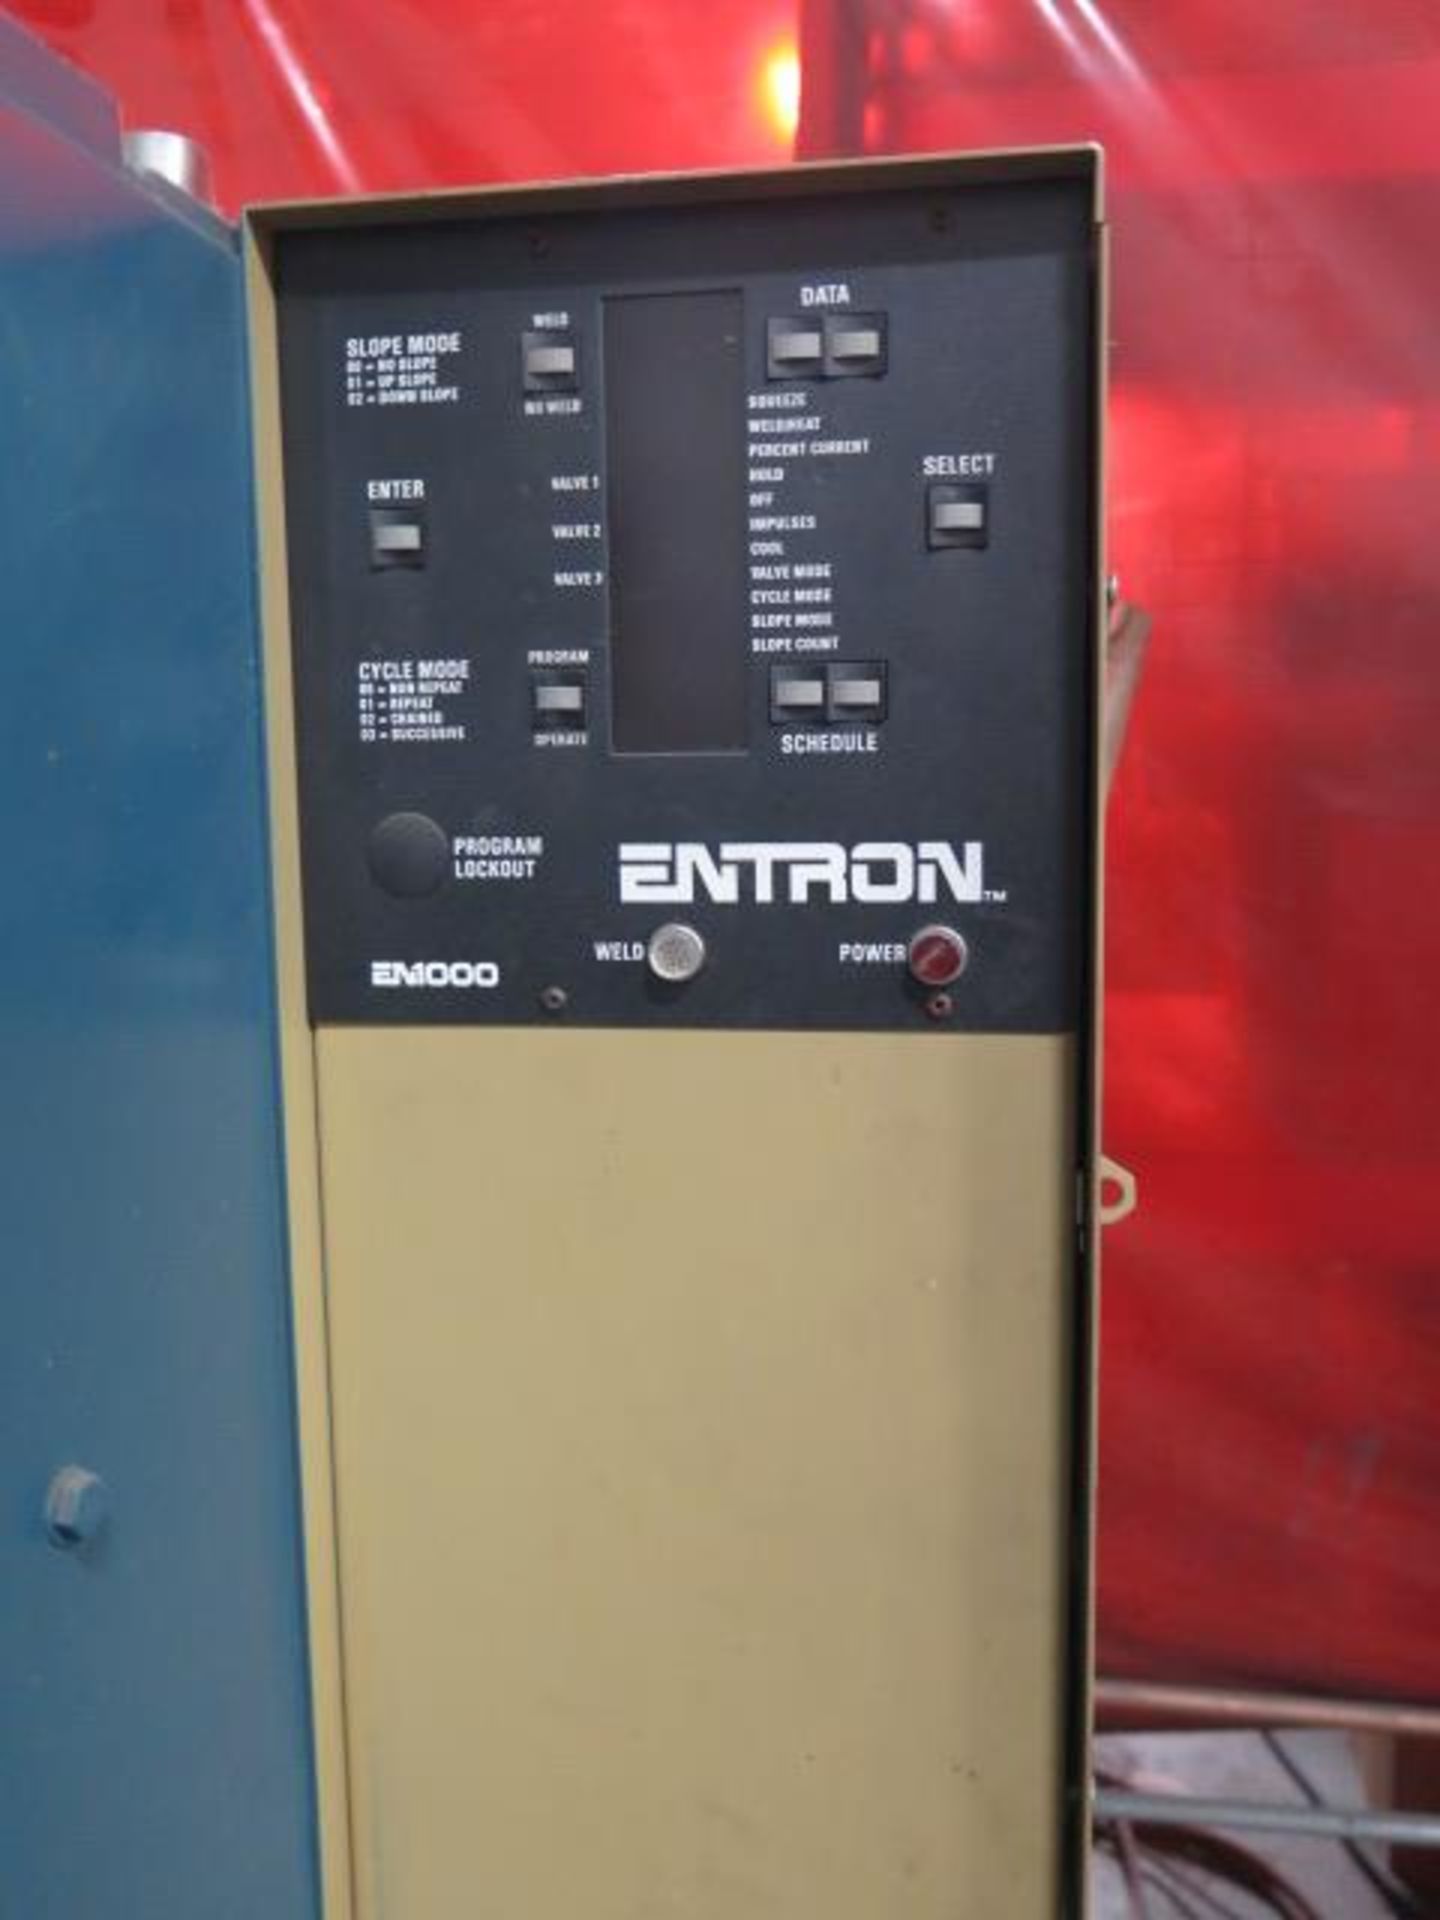 Entron Pneumatic Actuated Spot Welder s/n 10599 w/ Entron Controls (SOLD AS-IS - NO WARRANTY) - Image 9 of 10